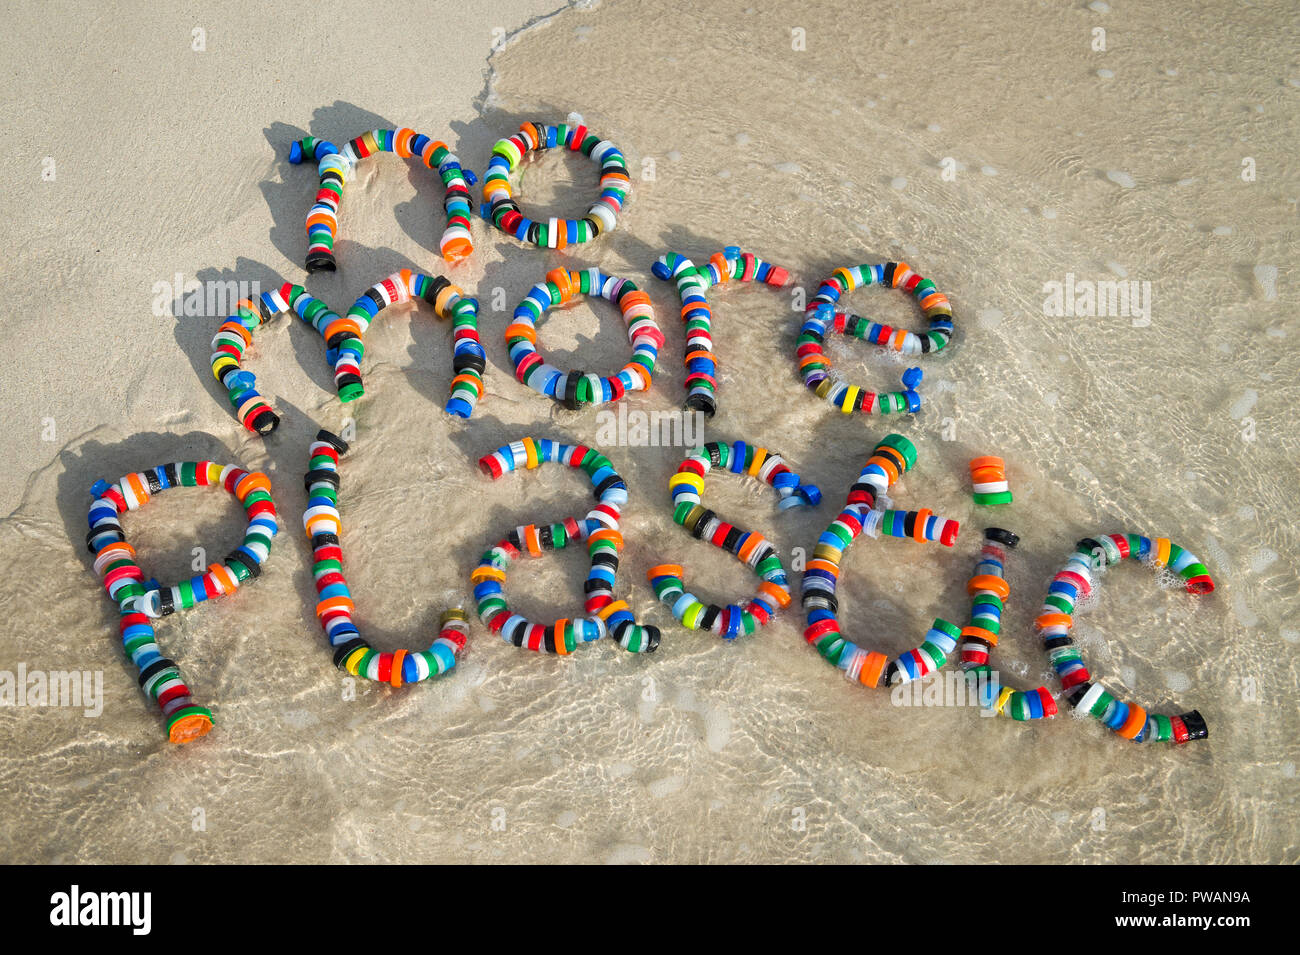 No More Plastic message made from colorful used bottle cap garbage on the smooth sand shore of a tropical beach Stock Photo